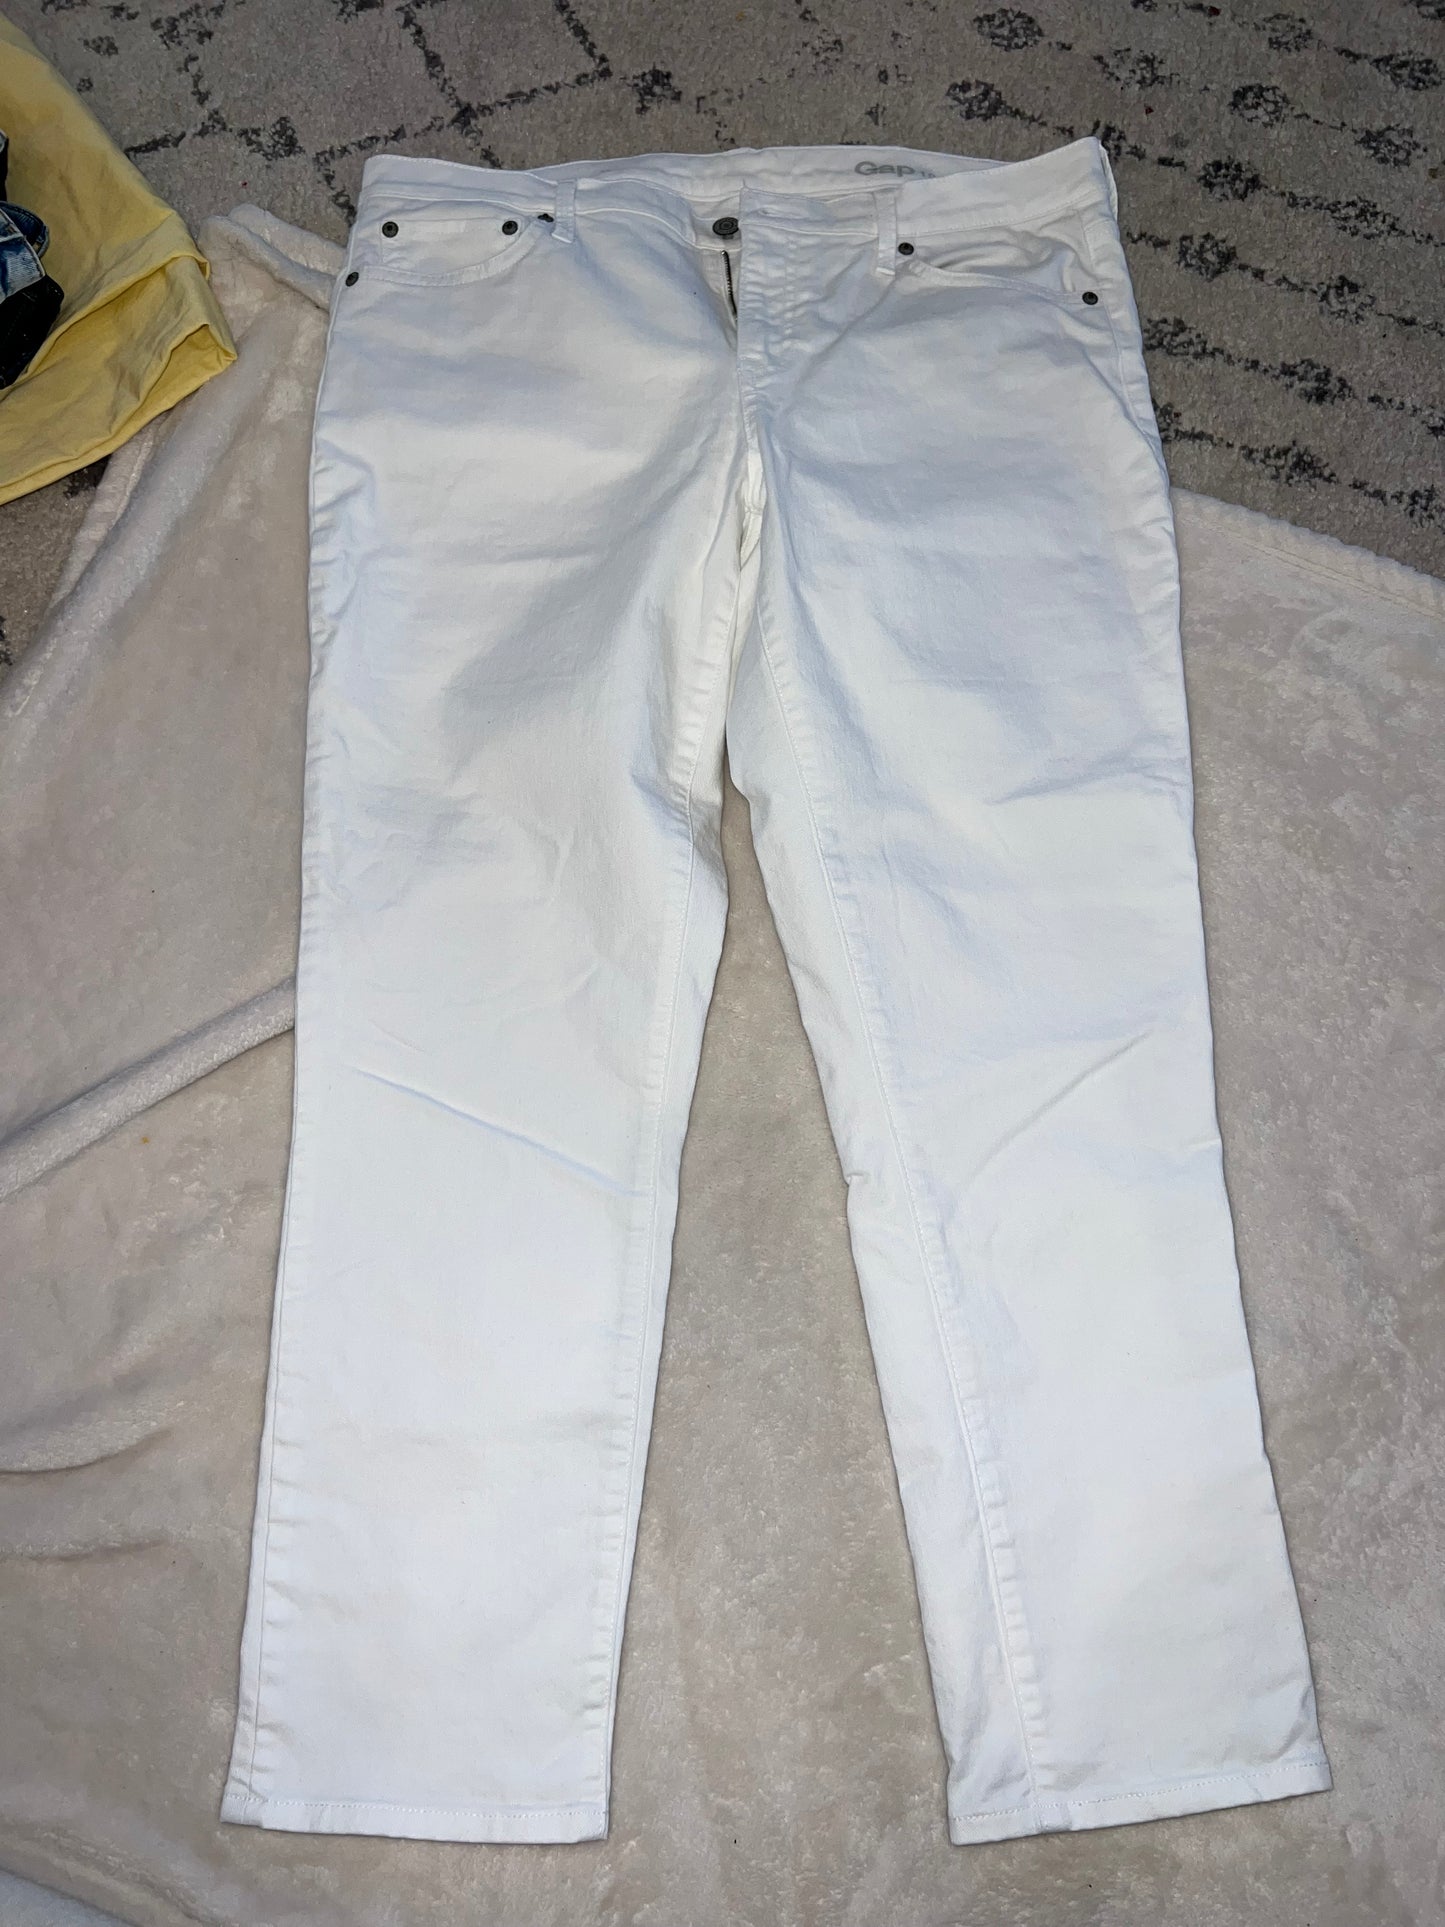 Womens size 31 Gap straight white jeans